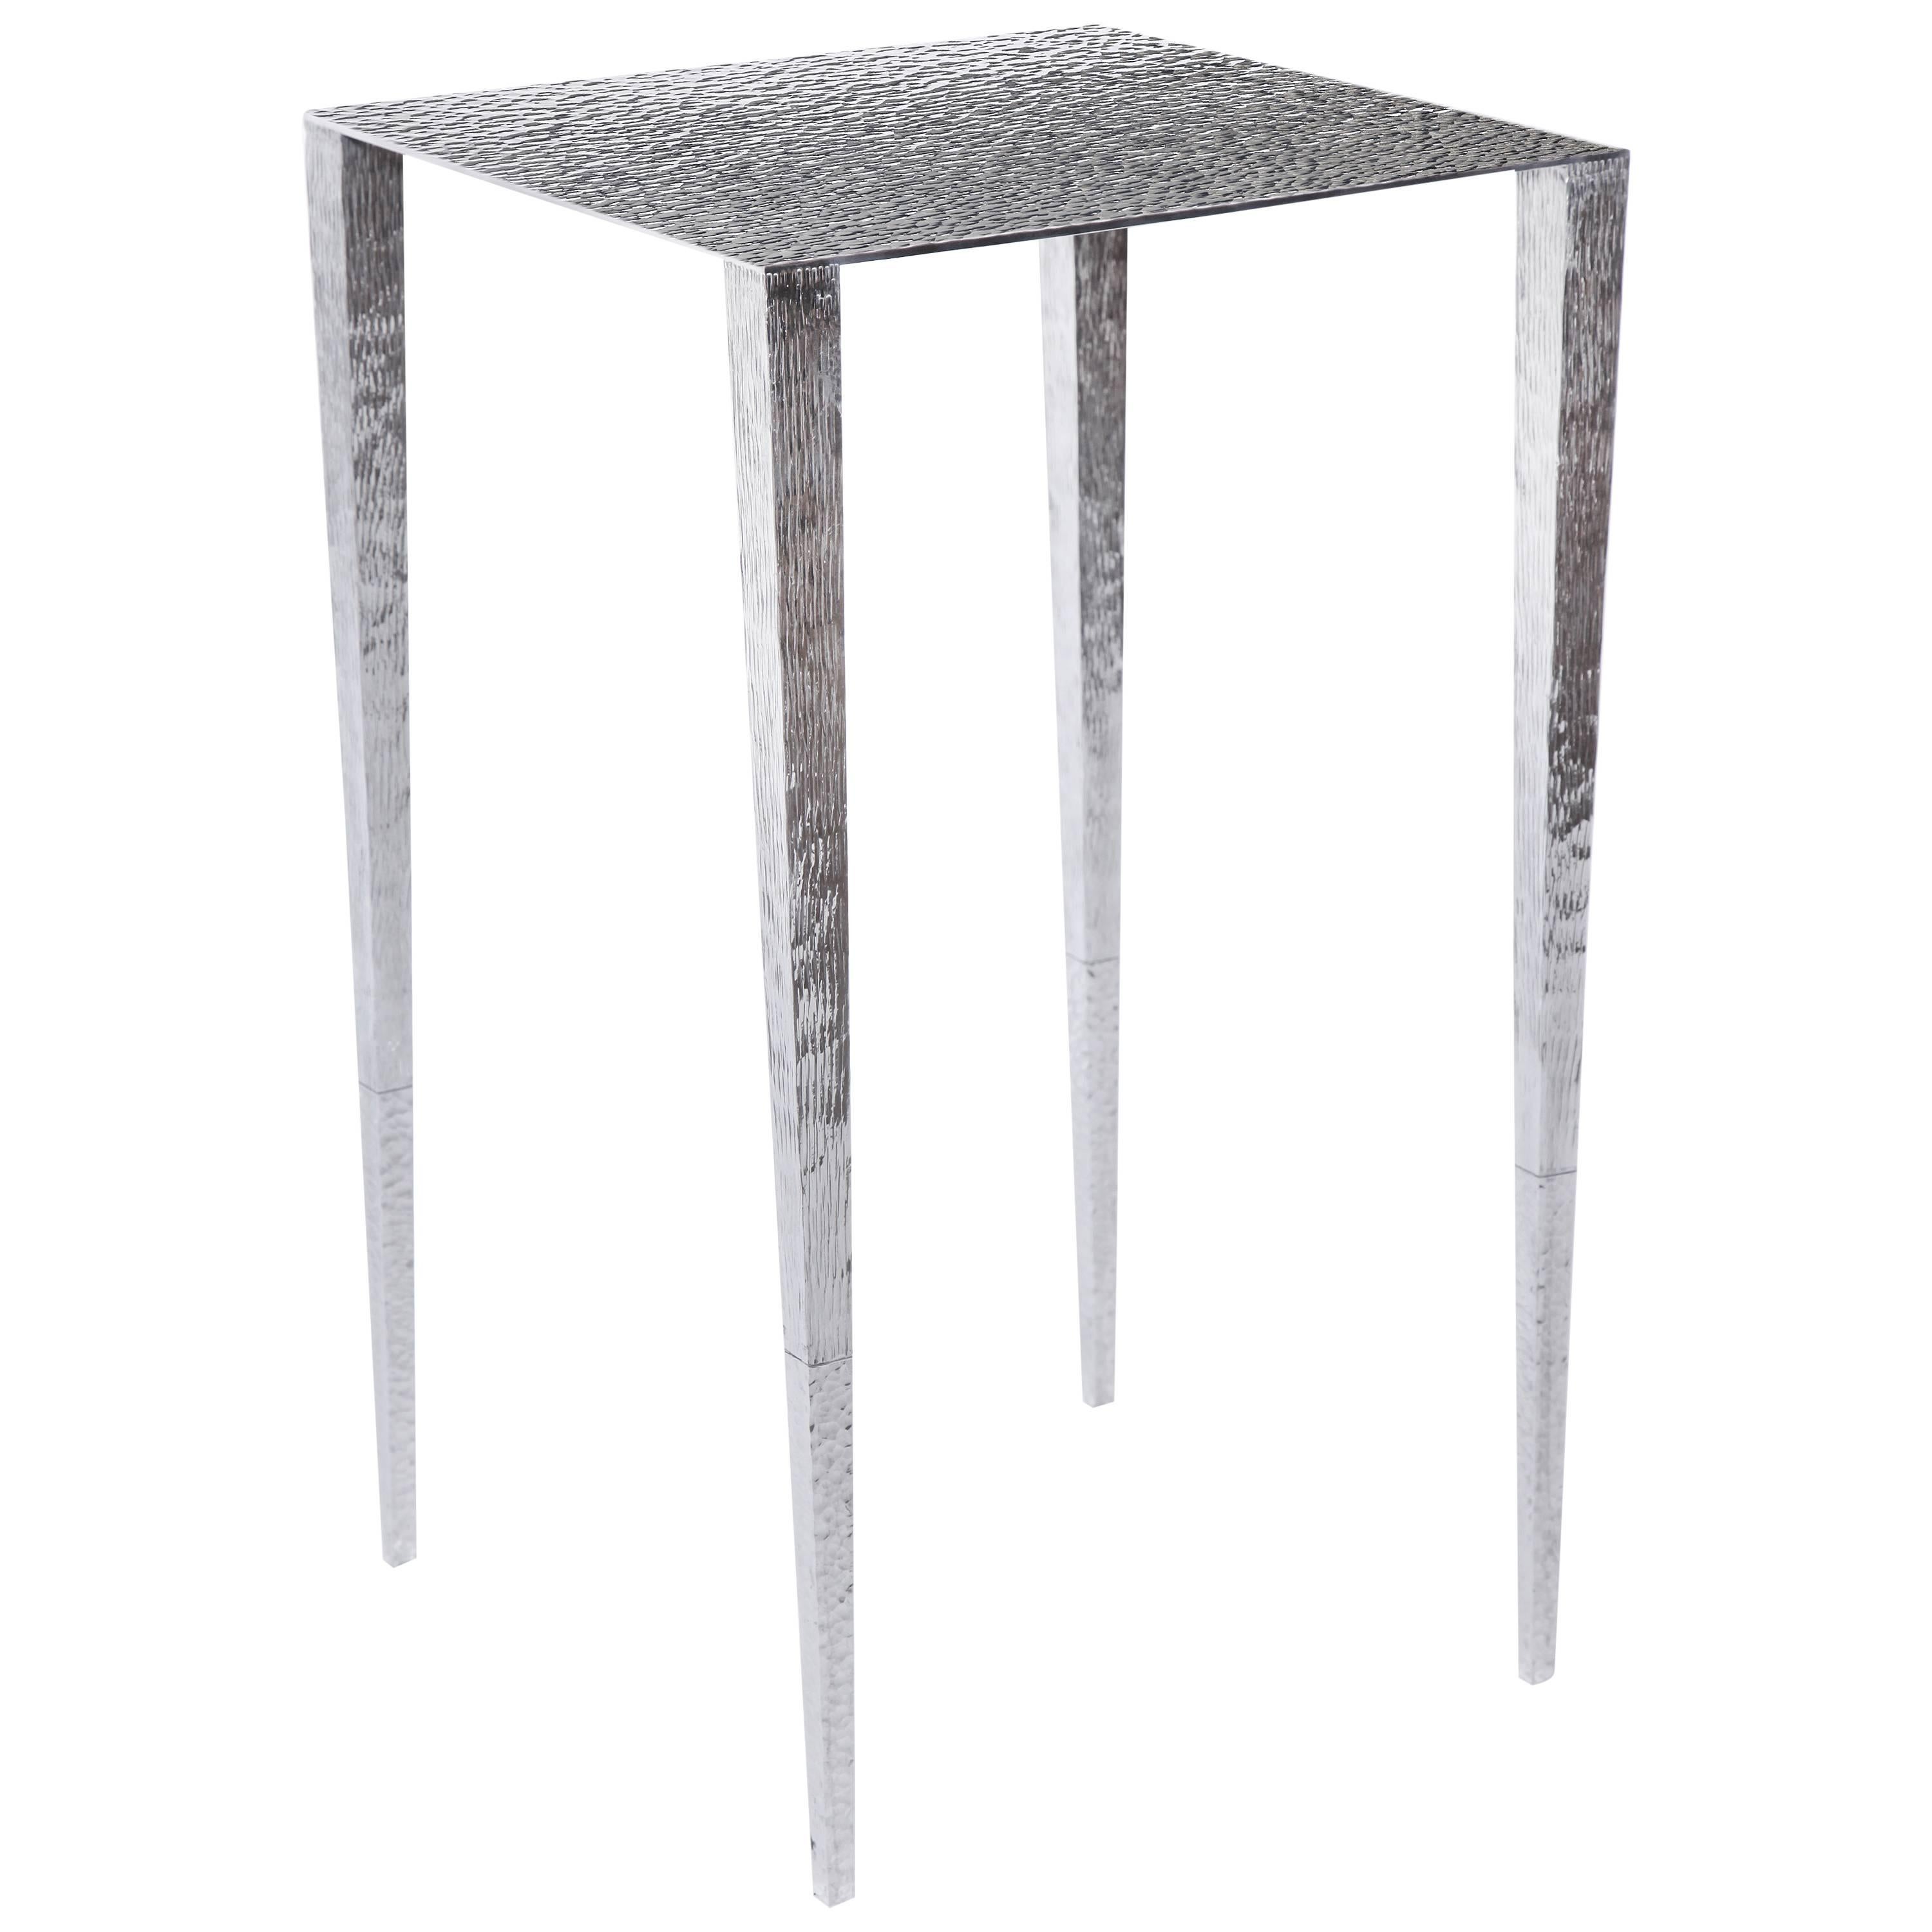 "Upaya" Contemporary Hand-Hammered Aluminum Side Table by Aurelien Gallet For Sale